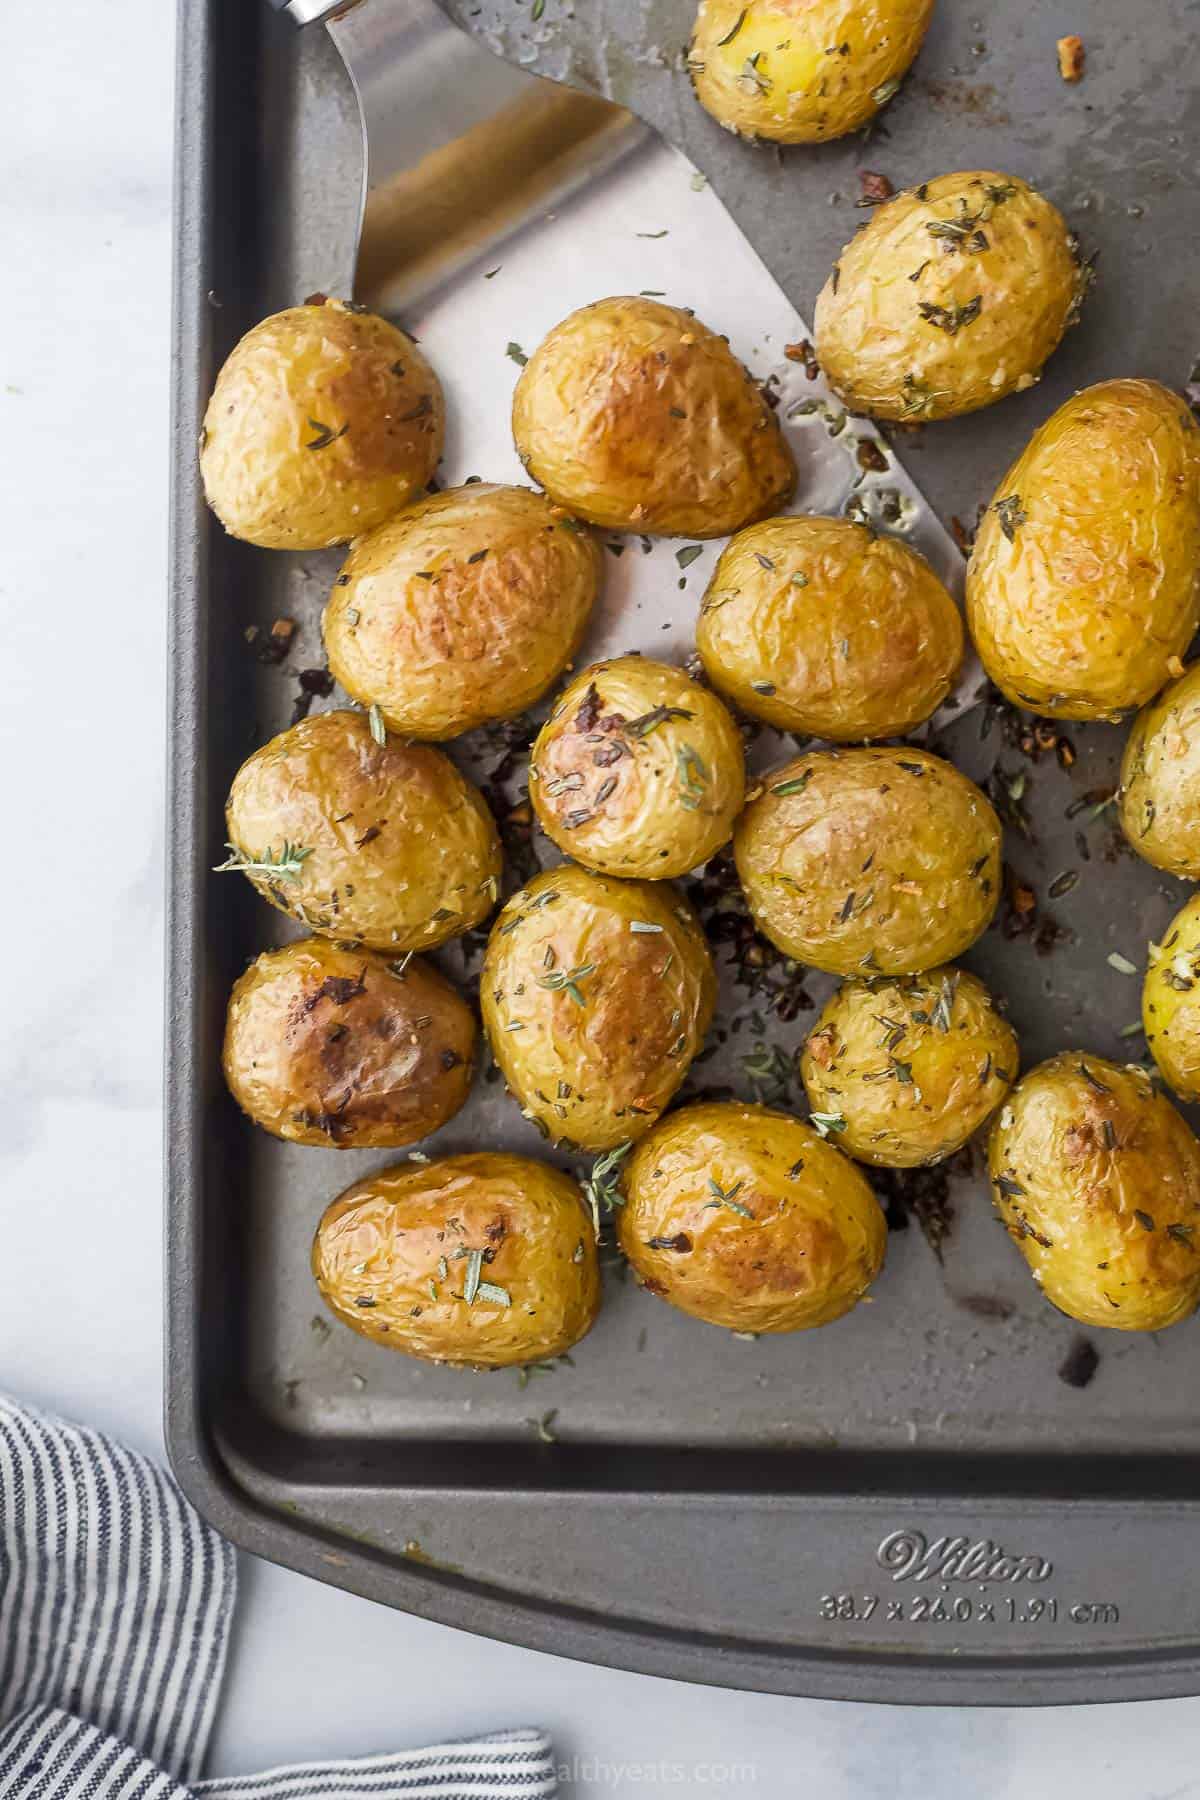 A metal spatula lifting up some crispy oven-baked potatoes from a baking sheet